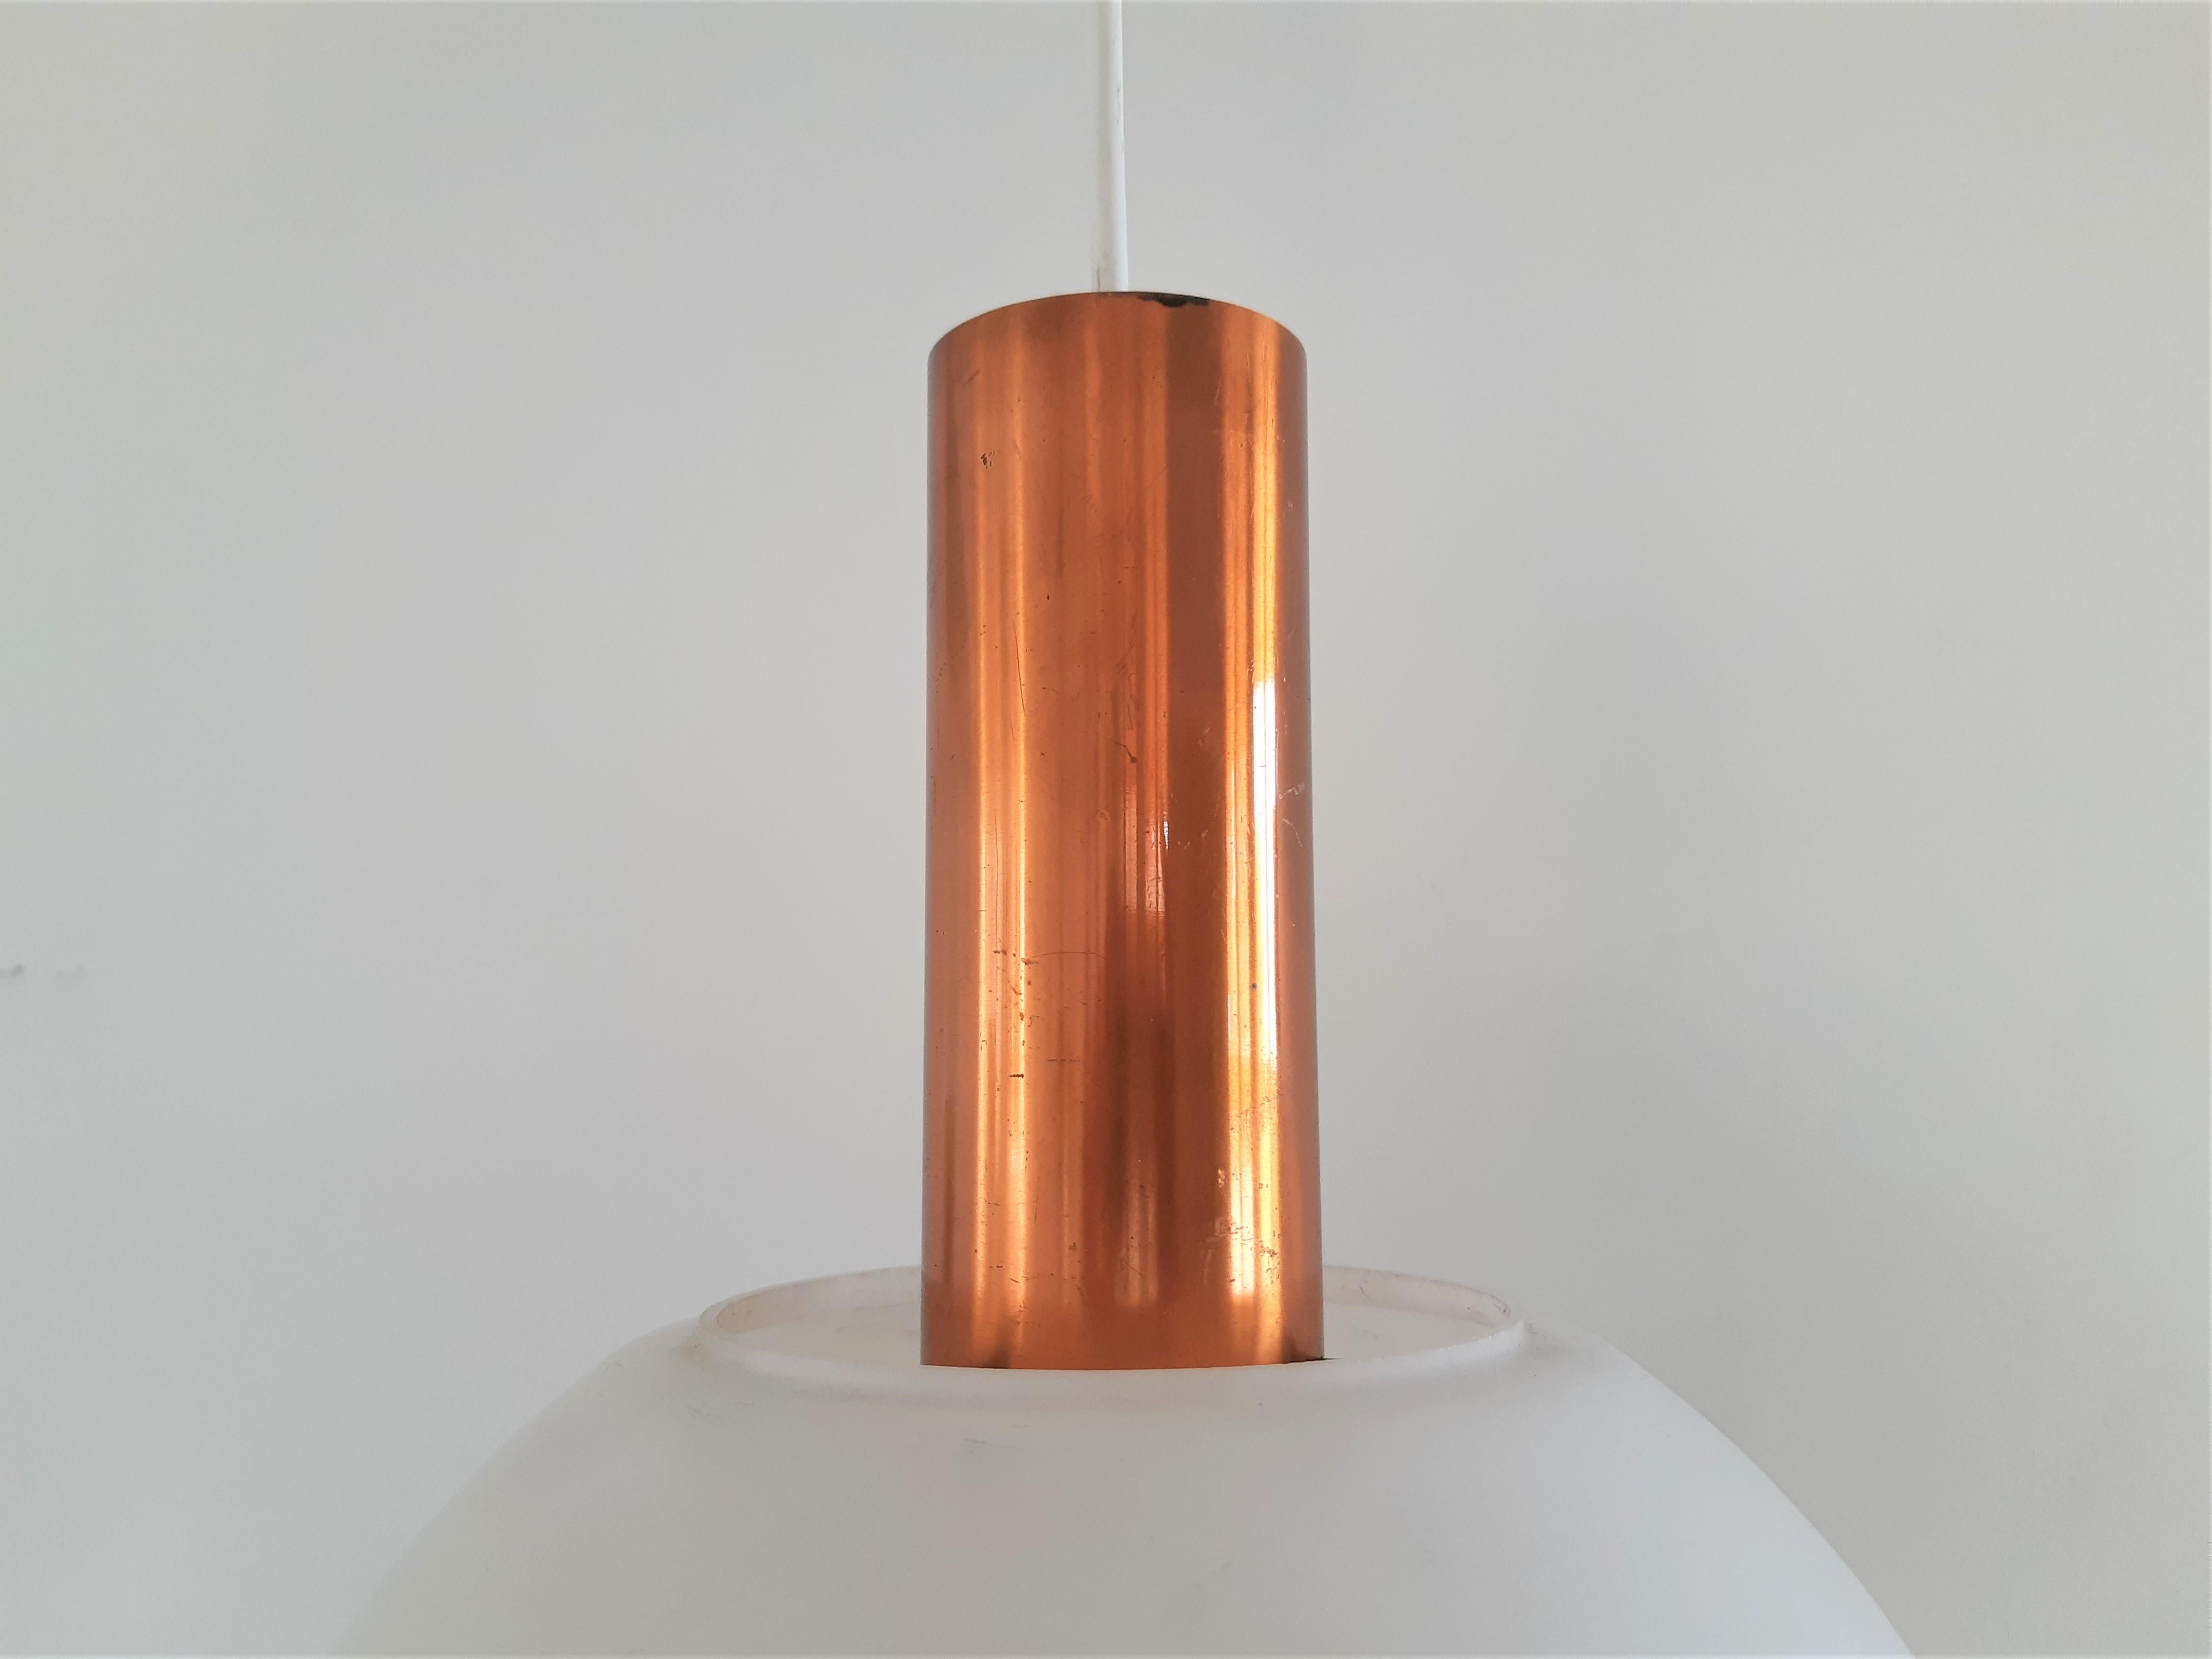 Dutch Set of 2 Copper and Glass Pendant Lamps for Hiemsrta Evolux, 1960's For Sale